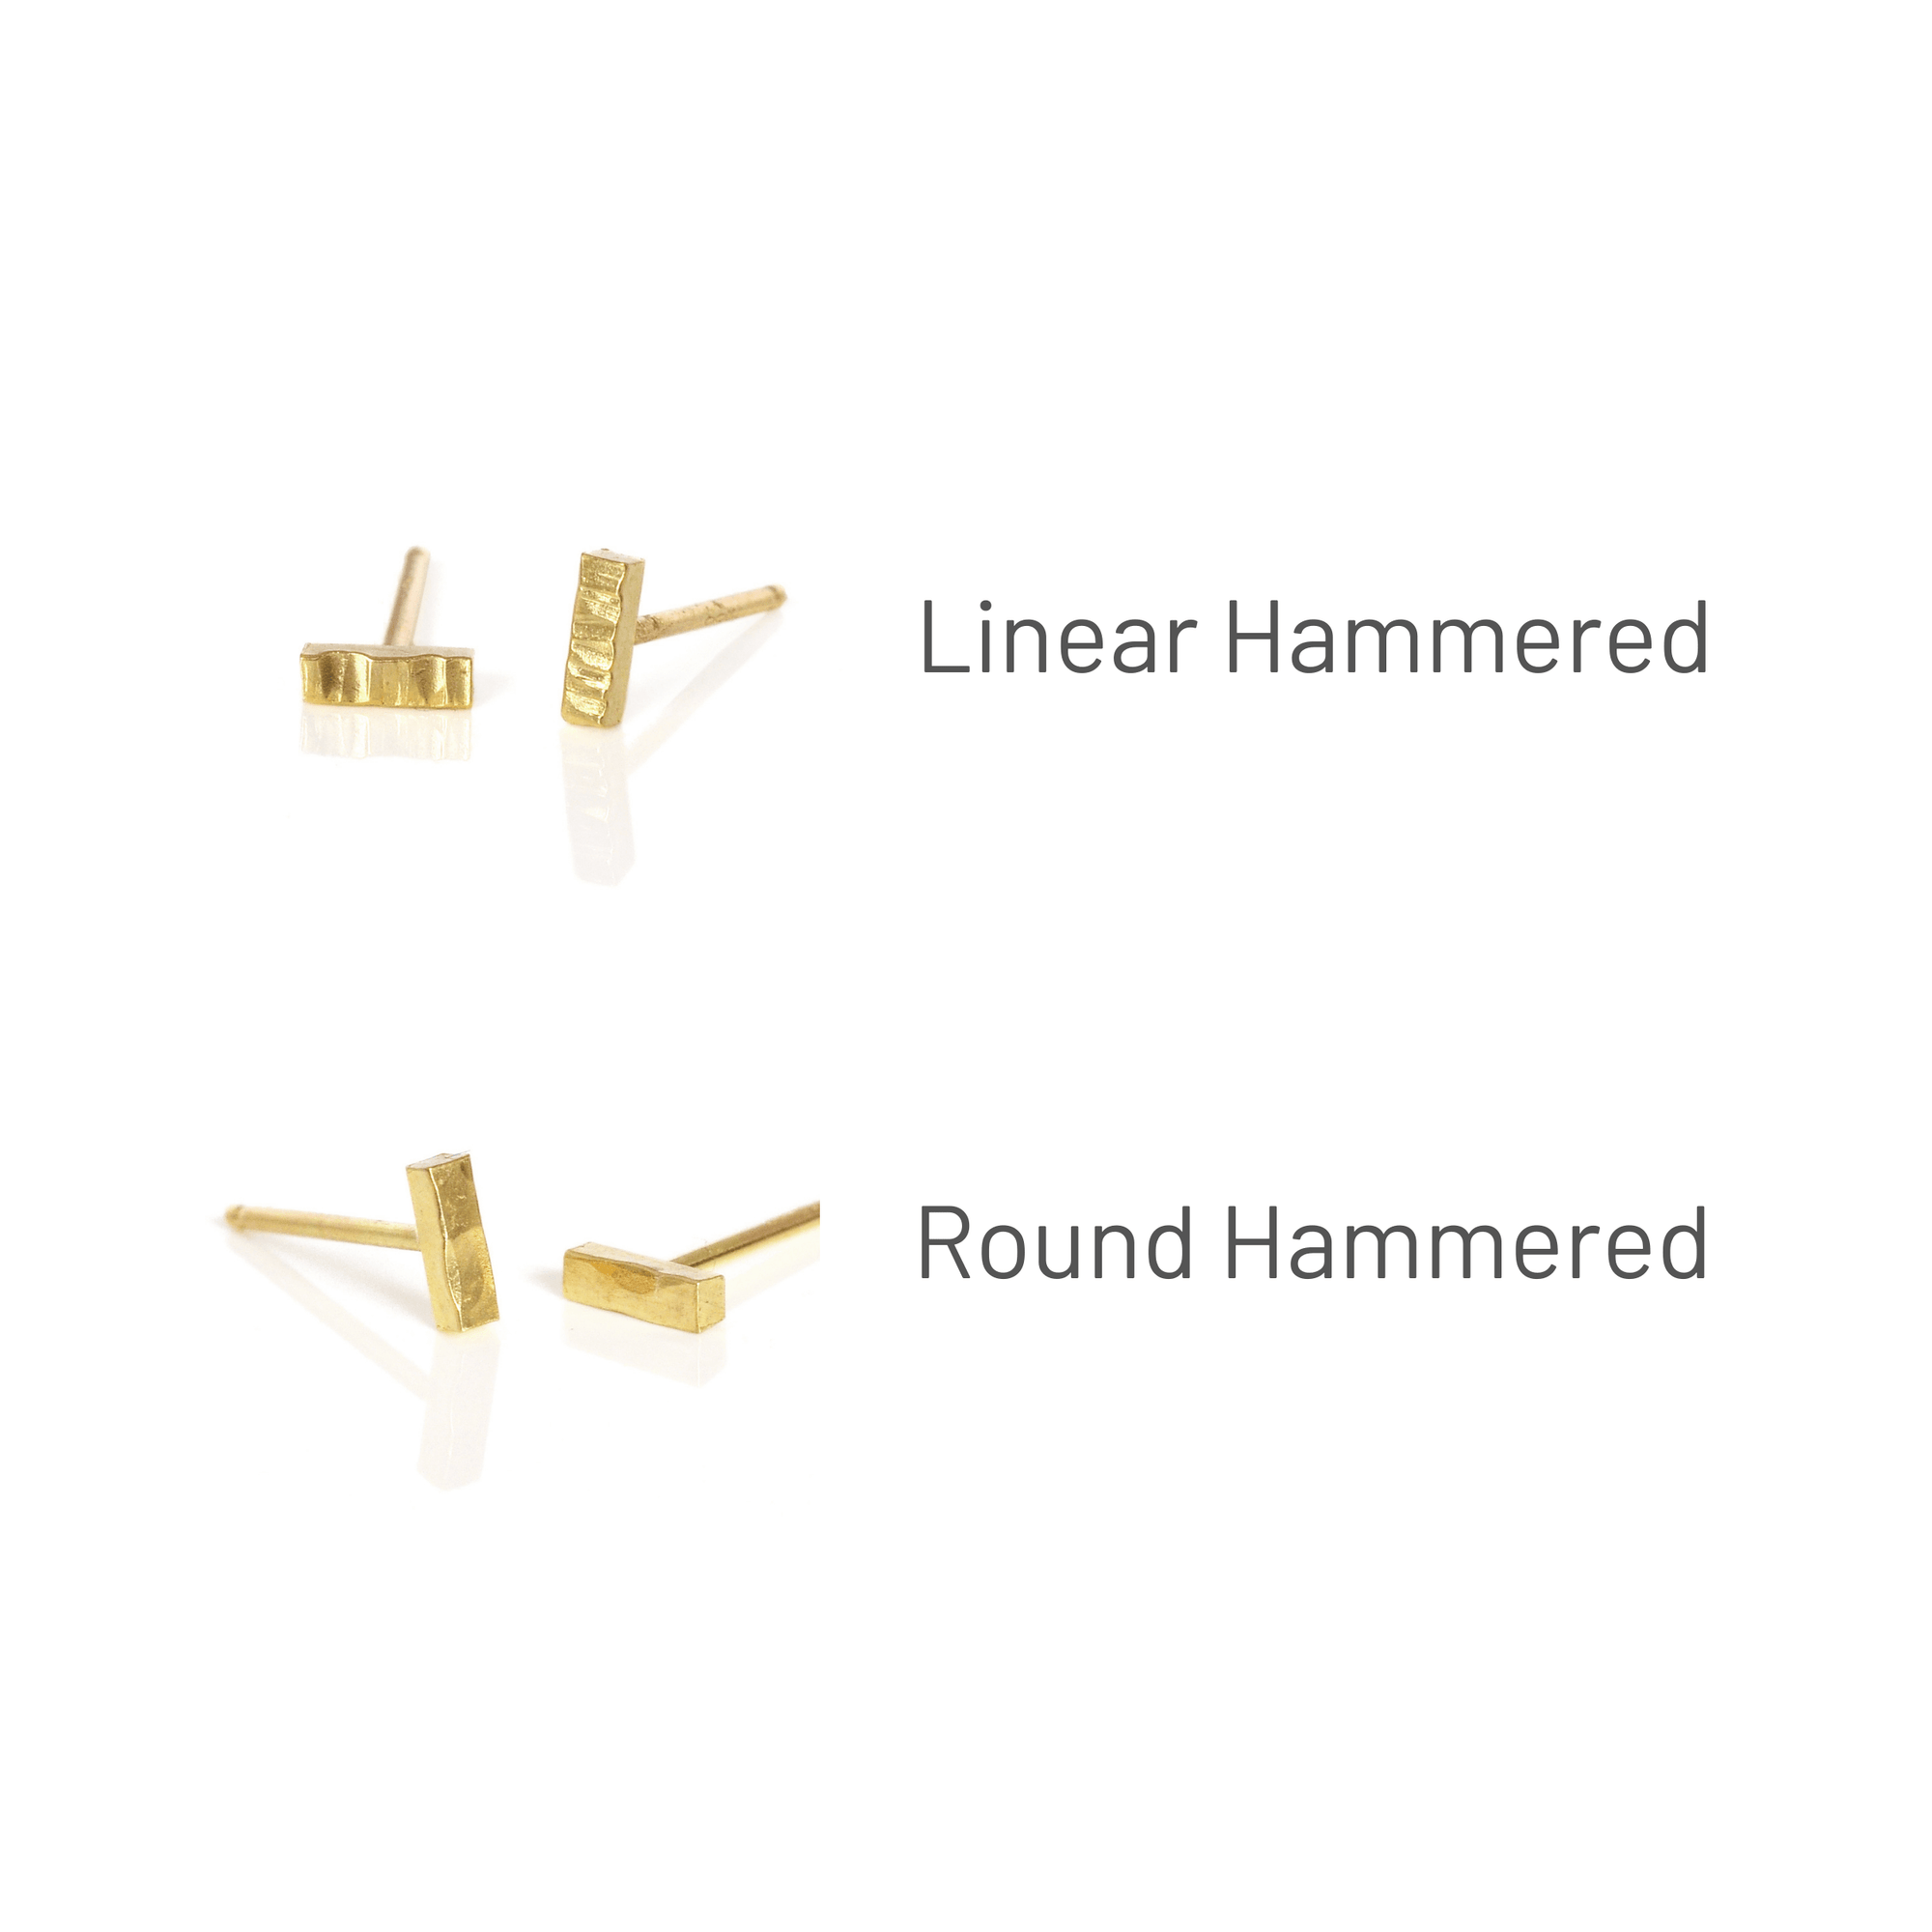 Linear and round hammered solid gold bar studs.